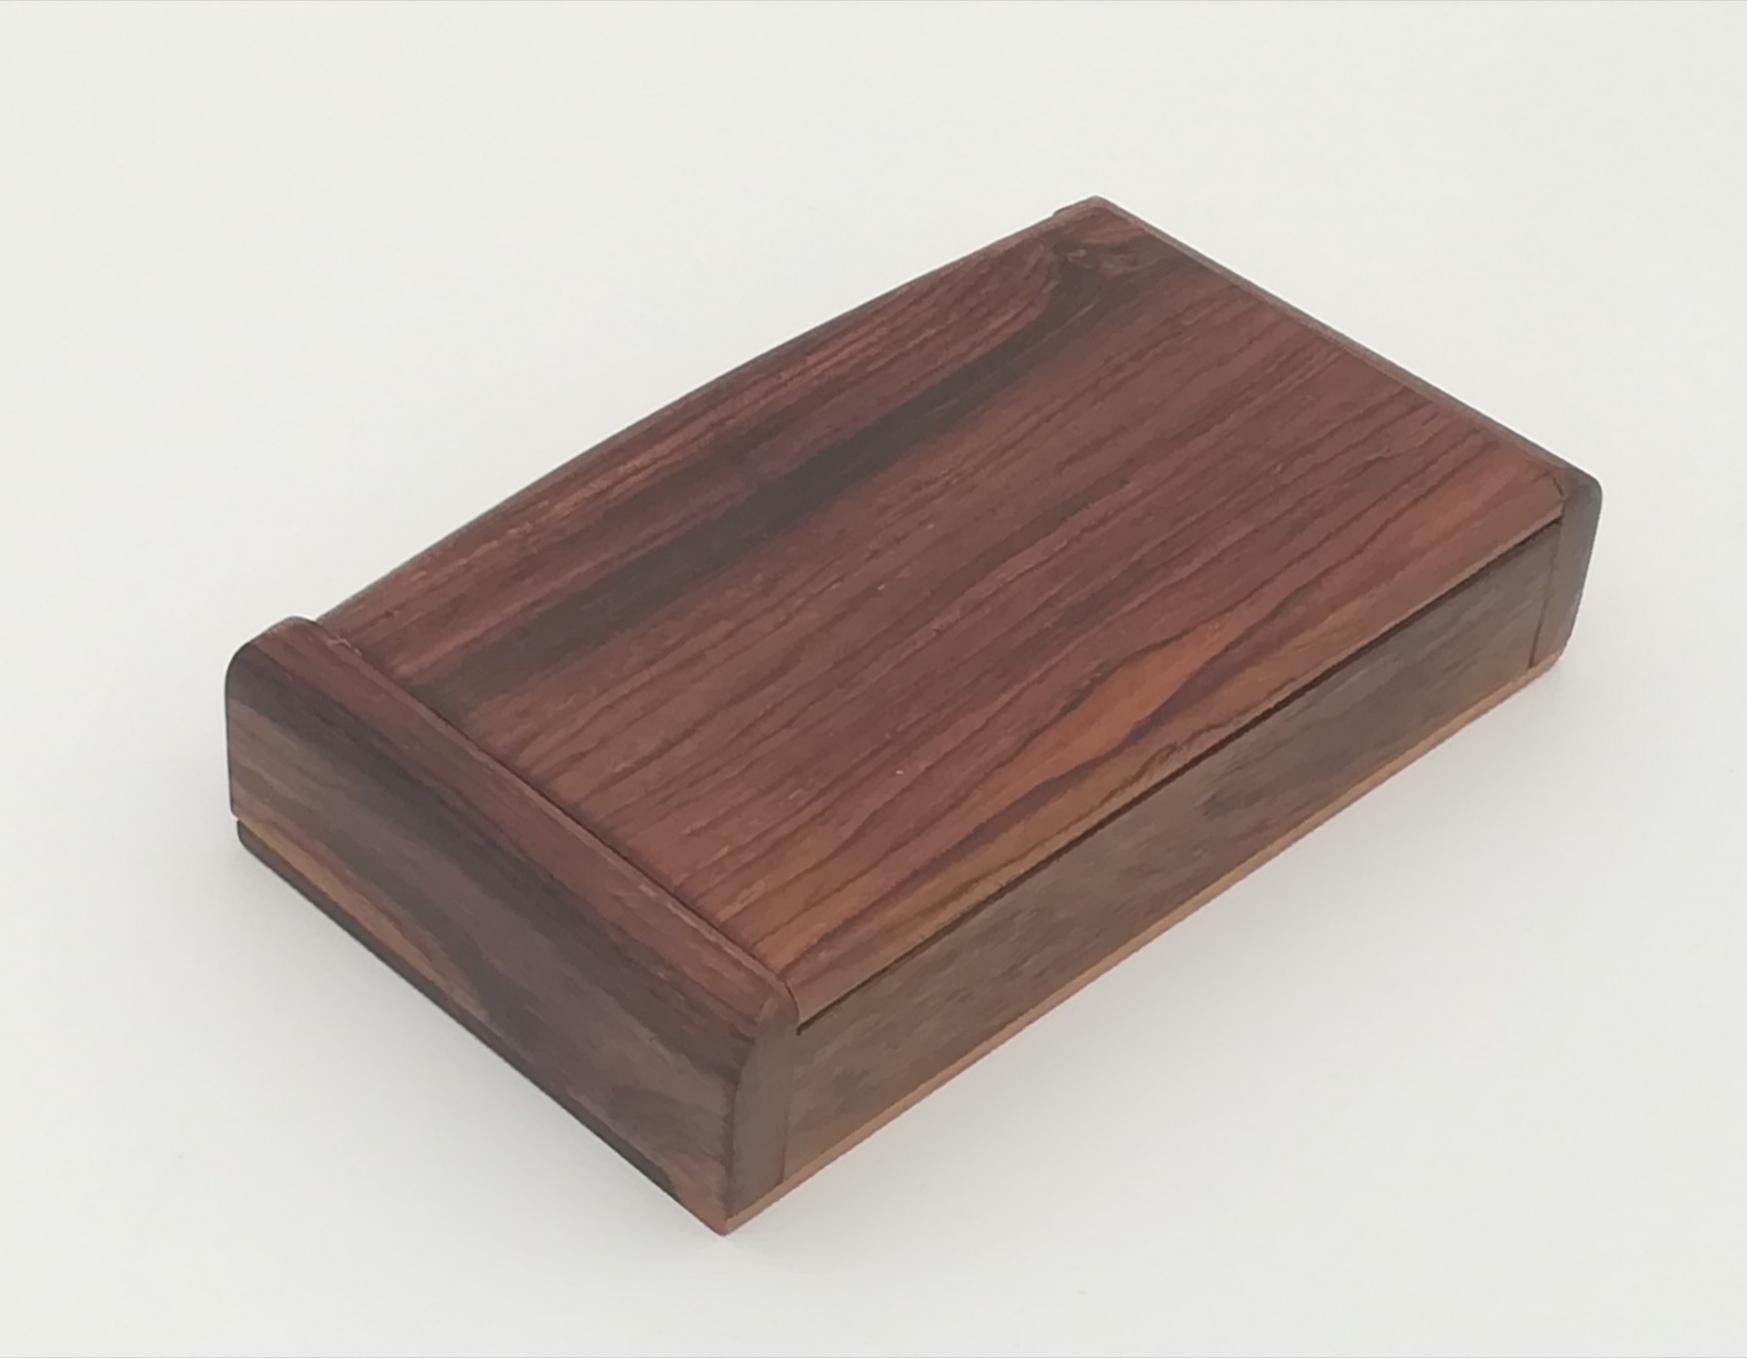 This beautiful and heavy cigar box, conceived by renowned Austrian designer Carl Auböck, appears in an elegant and noble manner on the table it occupies. The quality of the object shows very nice details in the wood and a fine sapwood accent. A fine